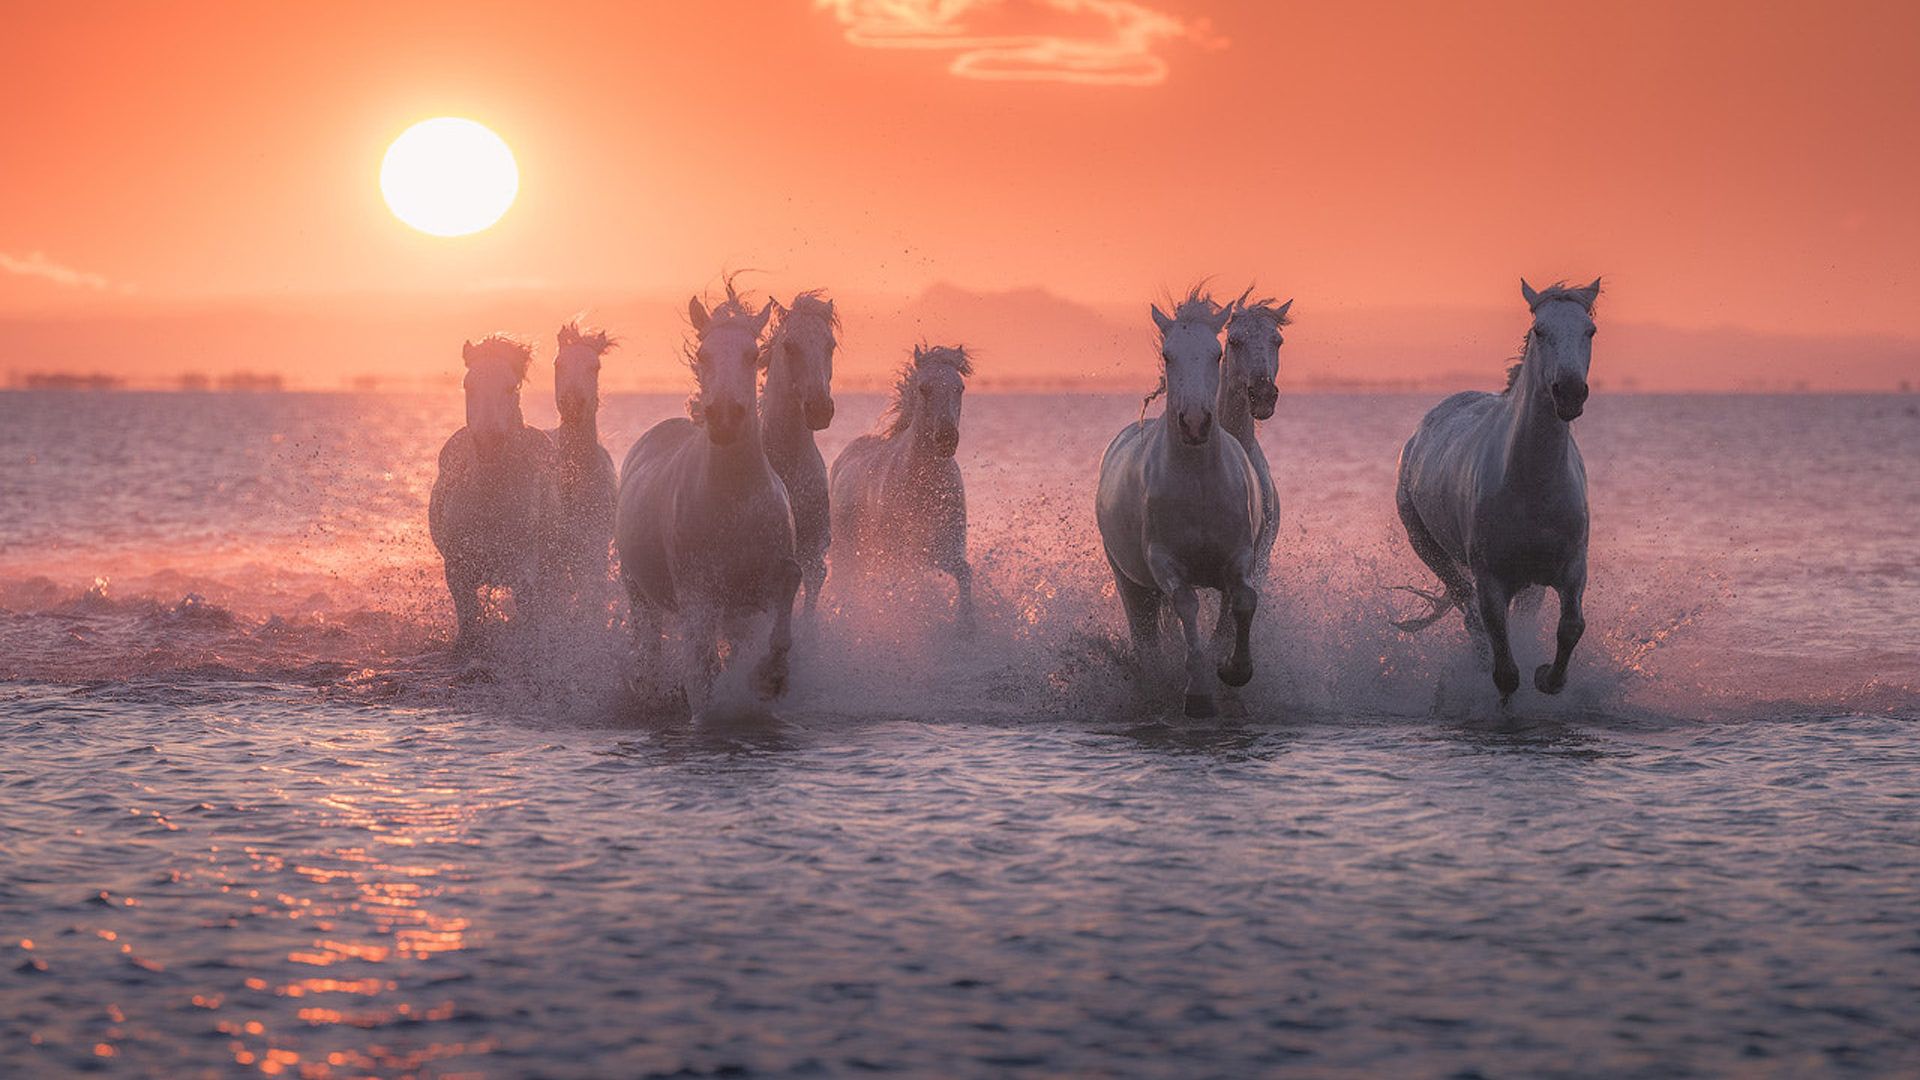 White Horses On Sunset Sea Waves Red Sky Beaches In Camargue South From France 4k Wallpaper Image For Your Desktop Background 1920x1200, Wallpaper13.com